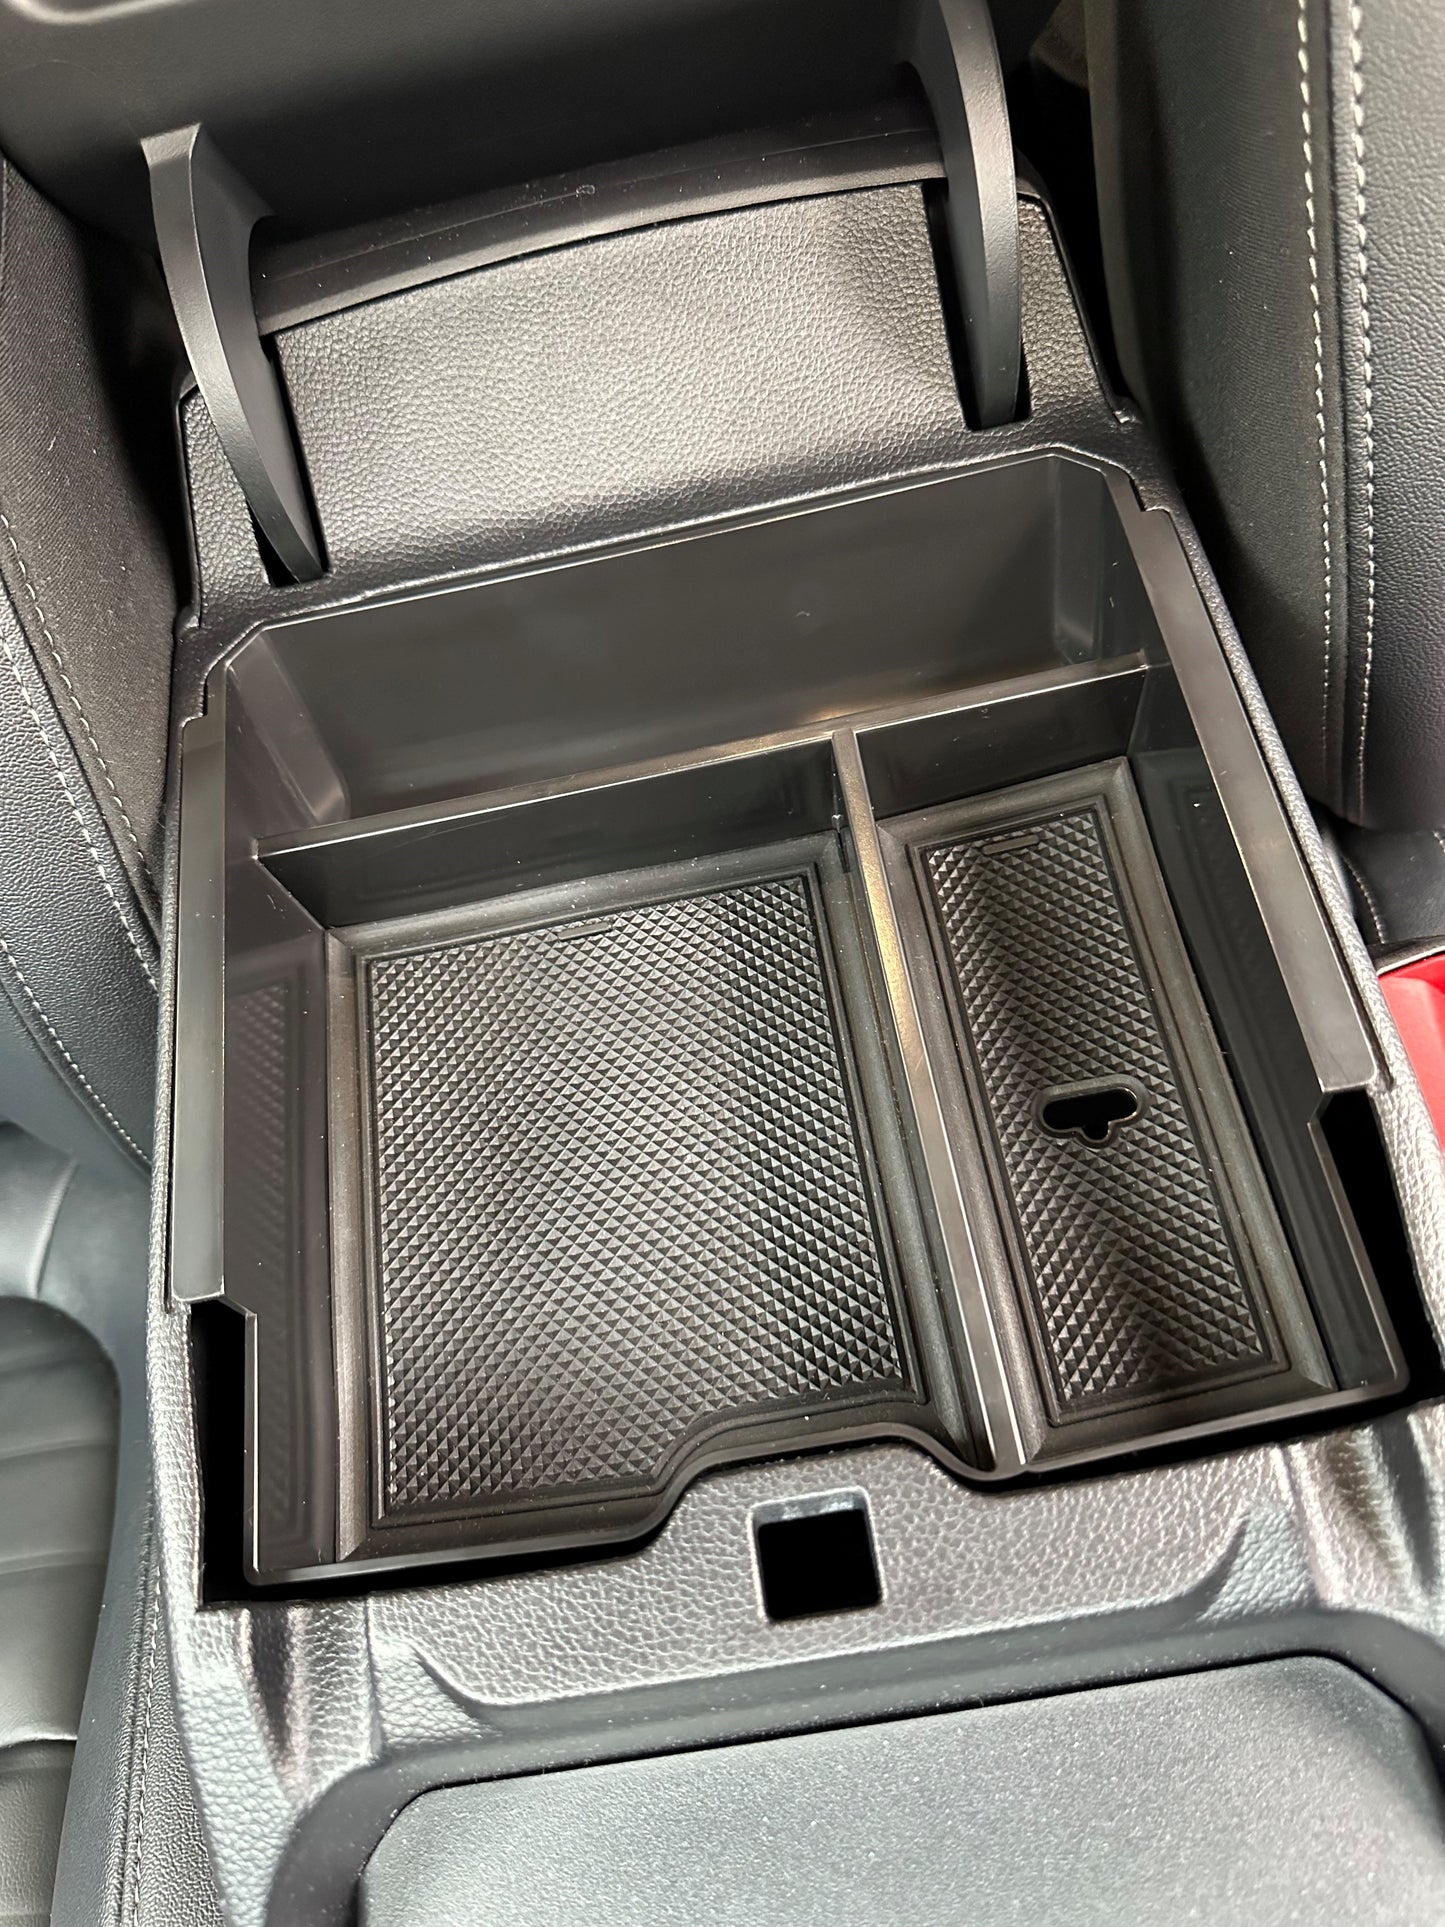 Next Gen Ford Ranger / Everest "Full Size" Centre Console Tray Caddy Storage 2022 2023 2024